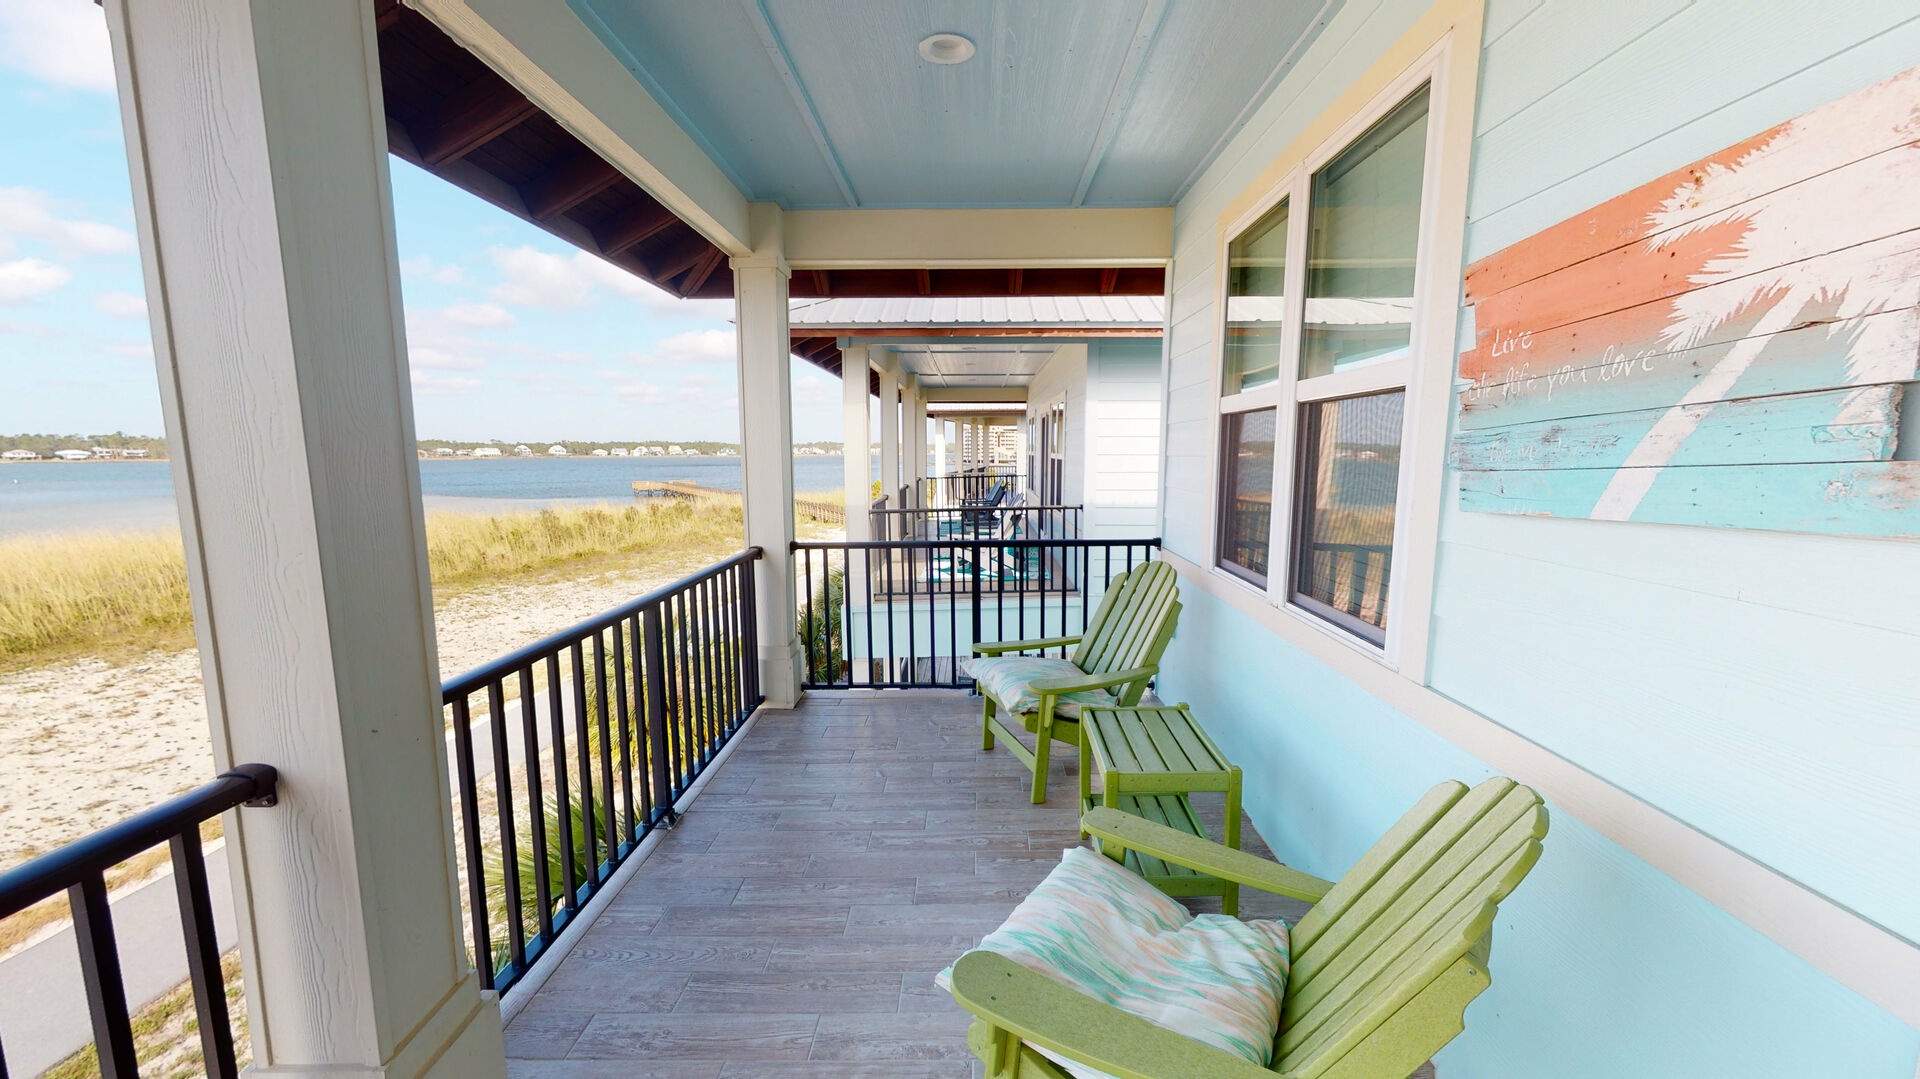 Private balcony off of the Master bedroom offers views of Little Lagoon